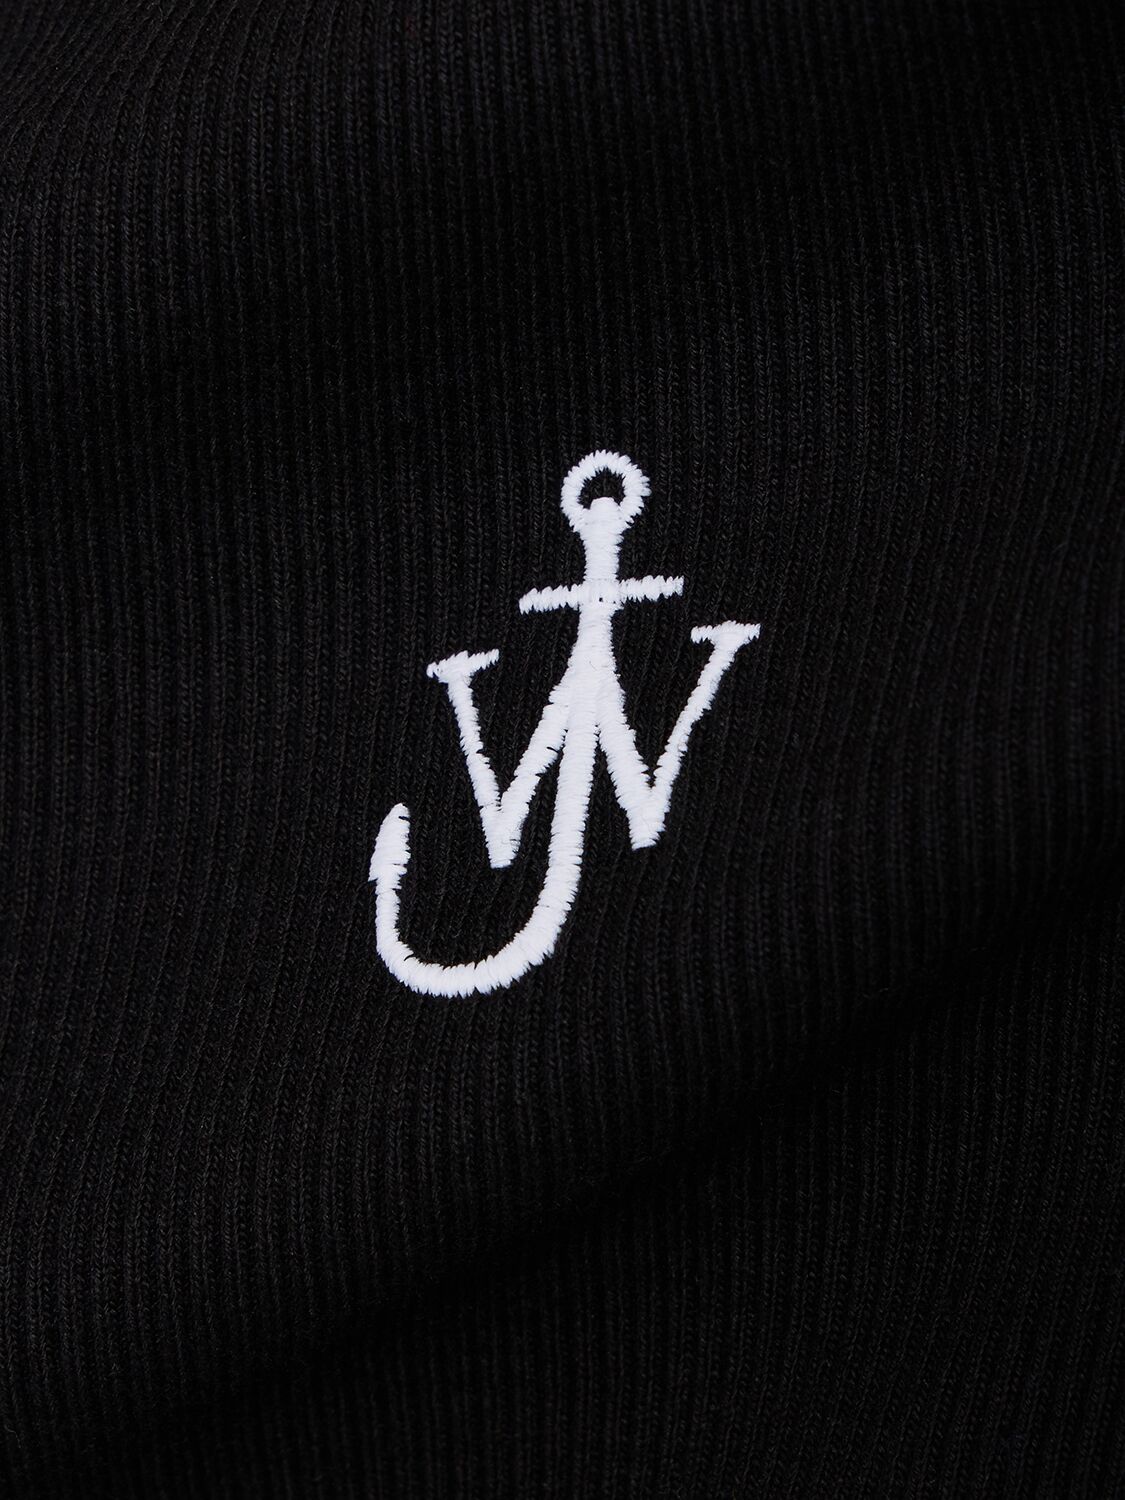 Shop Jw Anderson Logo Embroidered Ribbed Jersey Top In Black